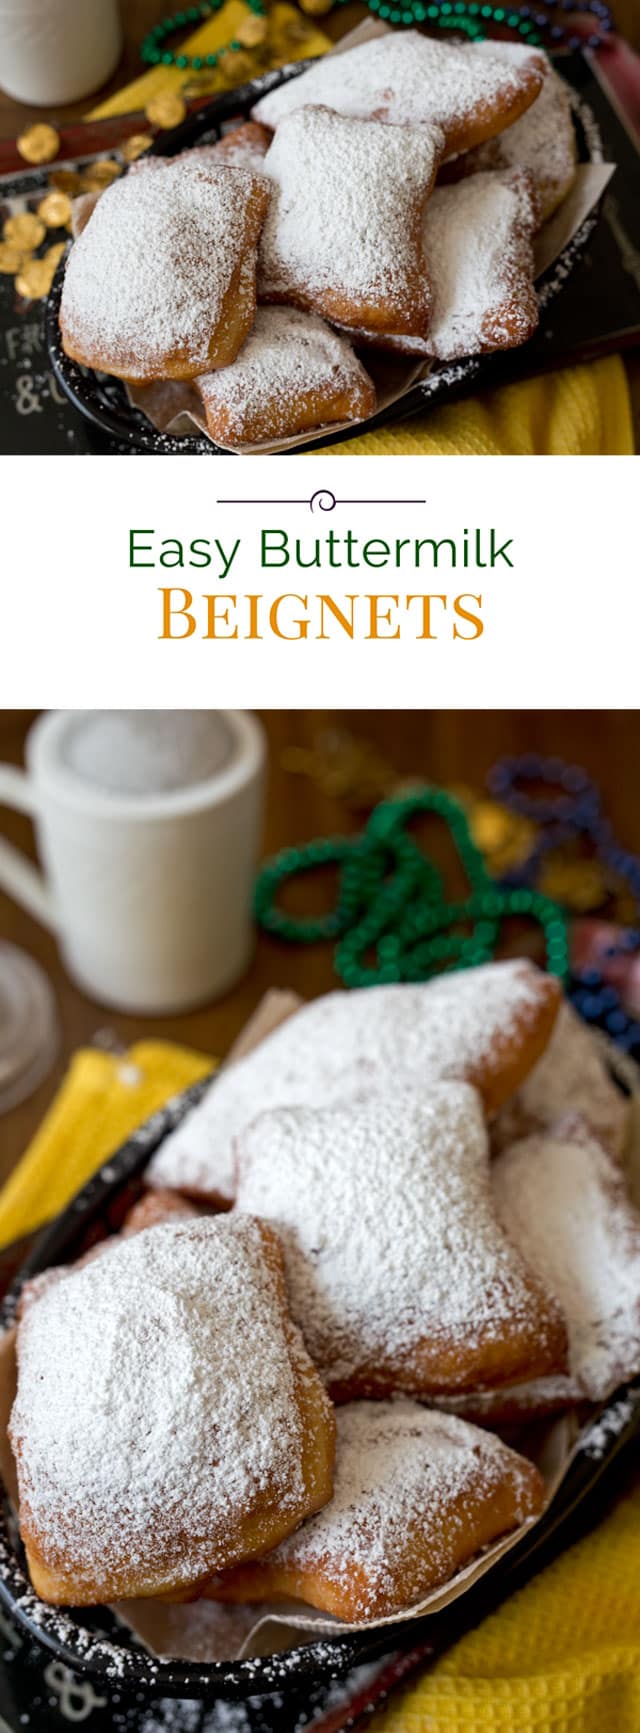 Easy-Beignets-Collage-Barbara-Bakes